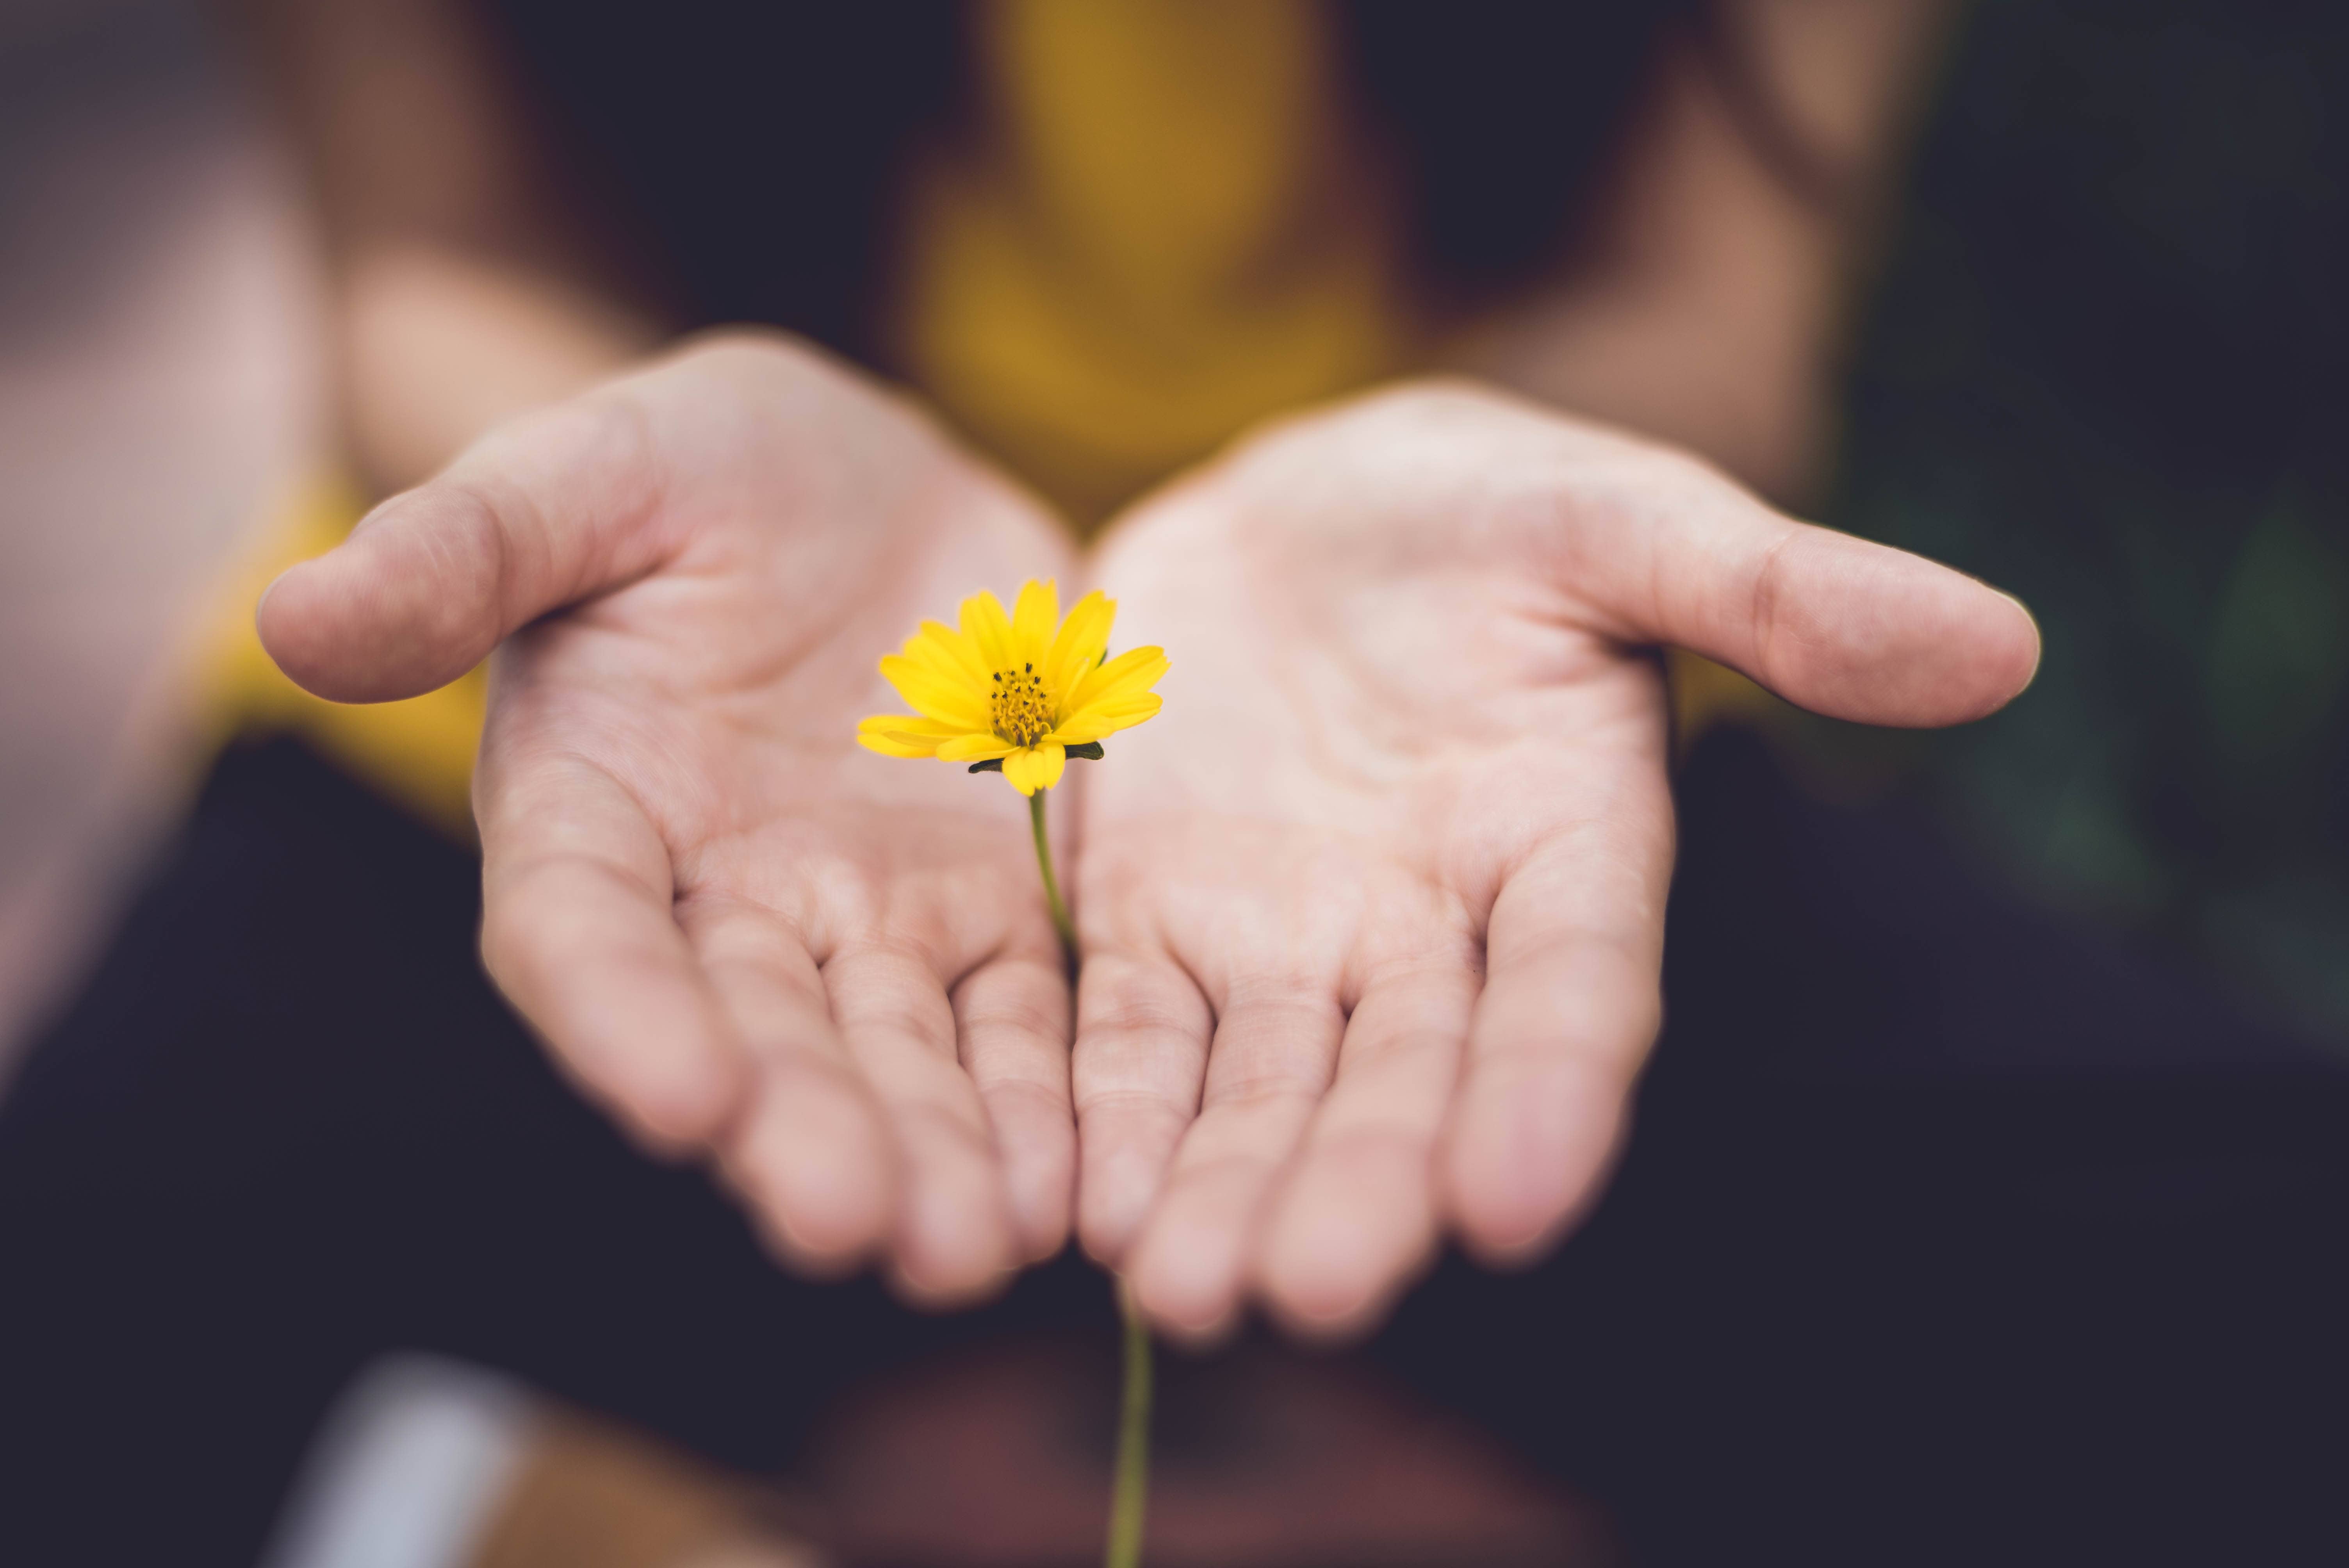 hands holding a tiny yellow flower